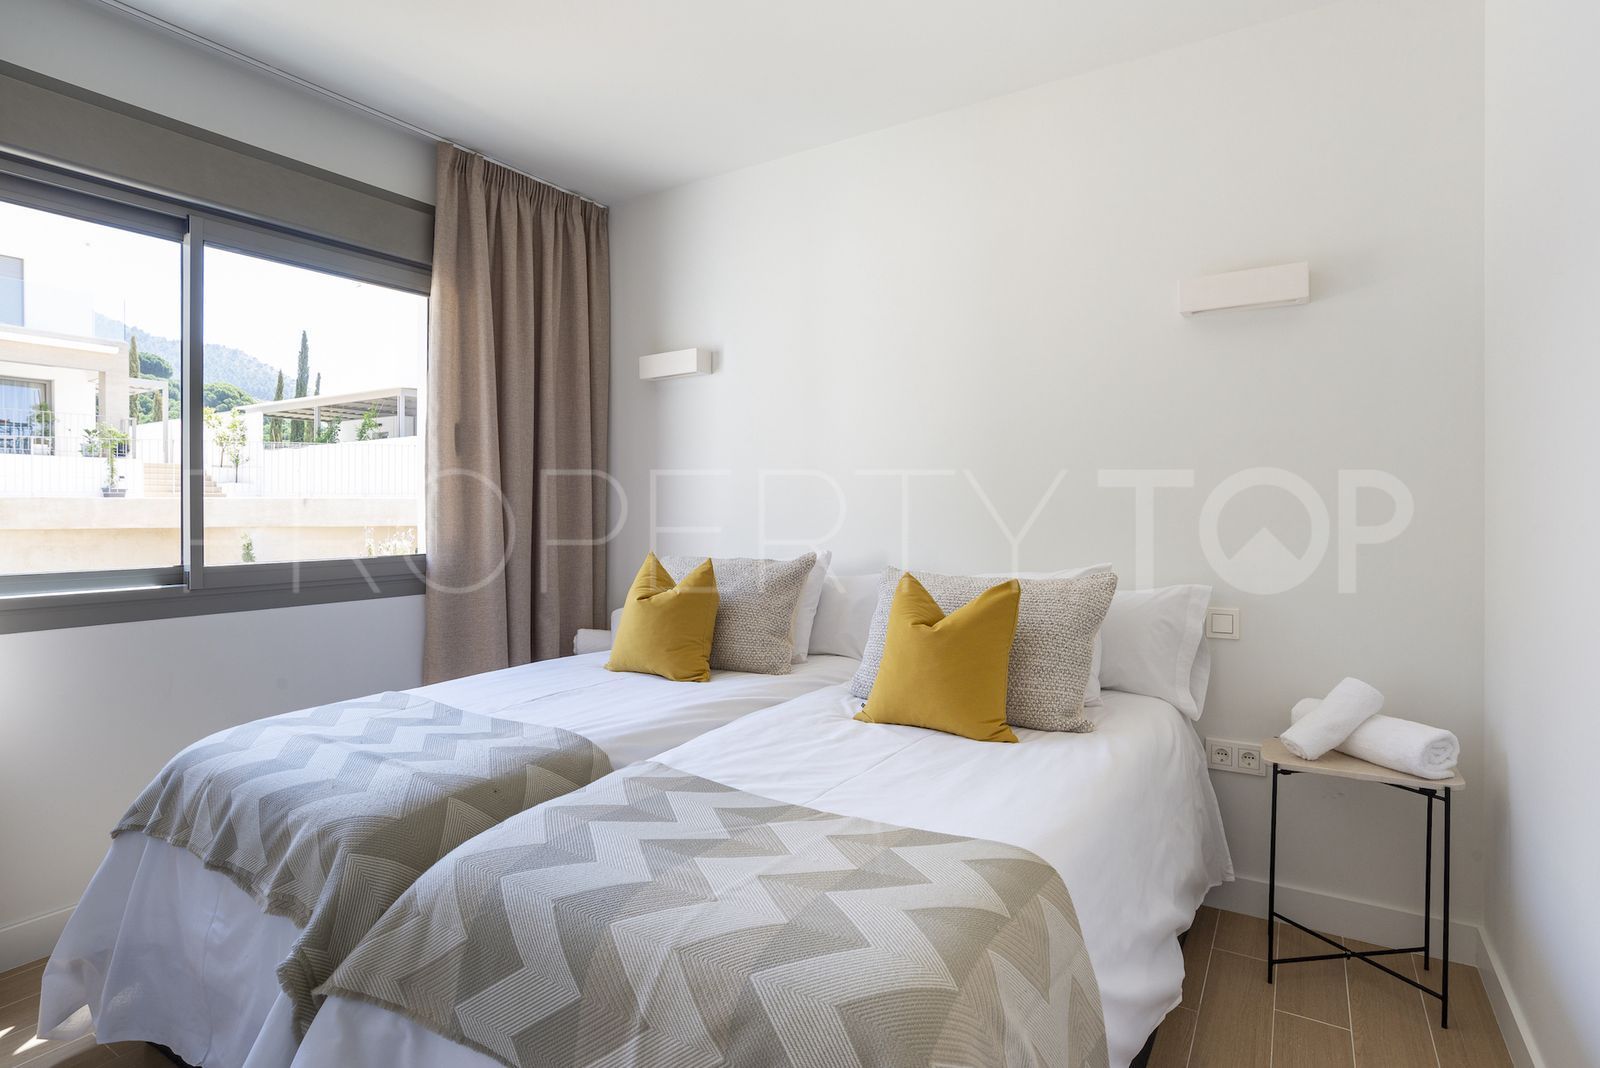 Town house for sale in Mijas with 4 bedrooms